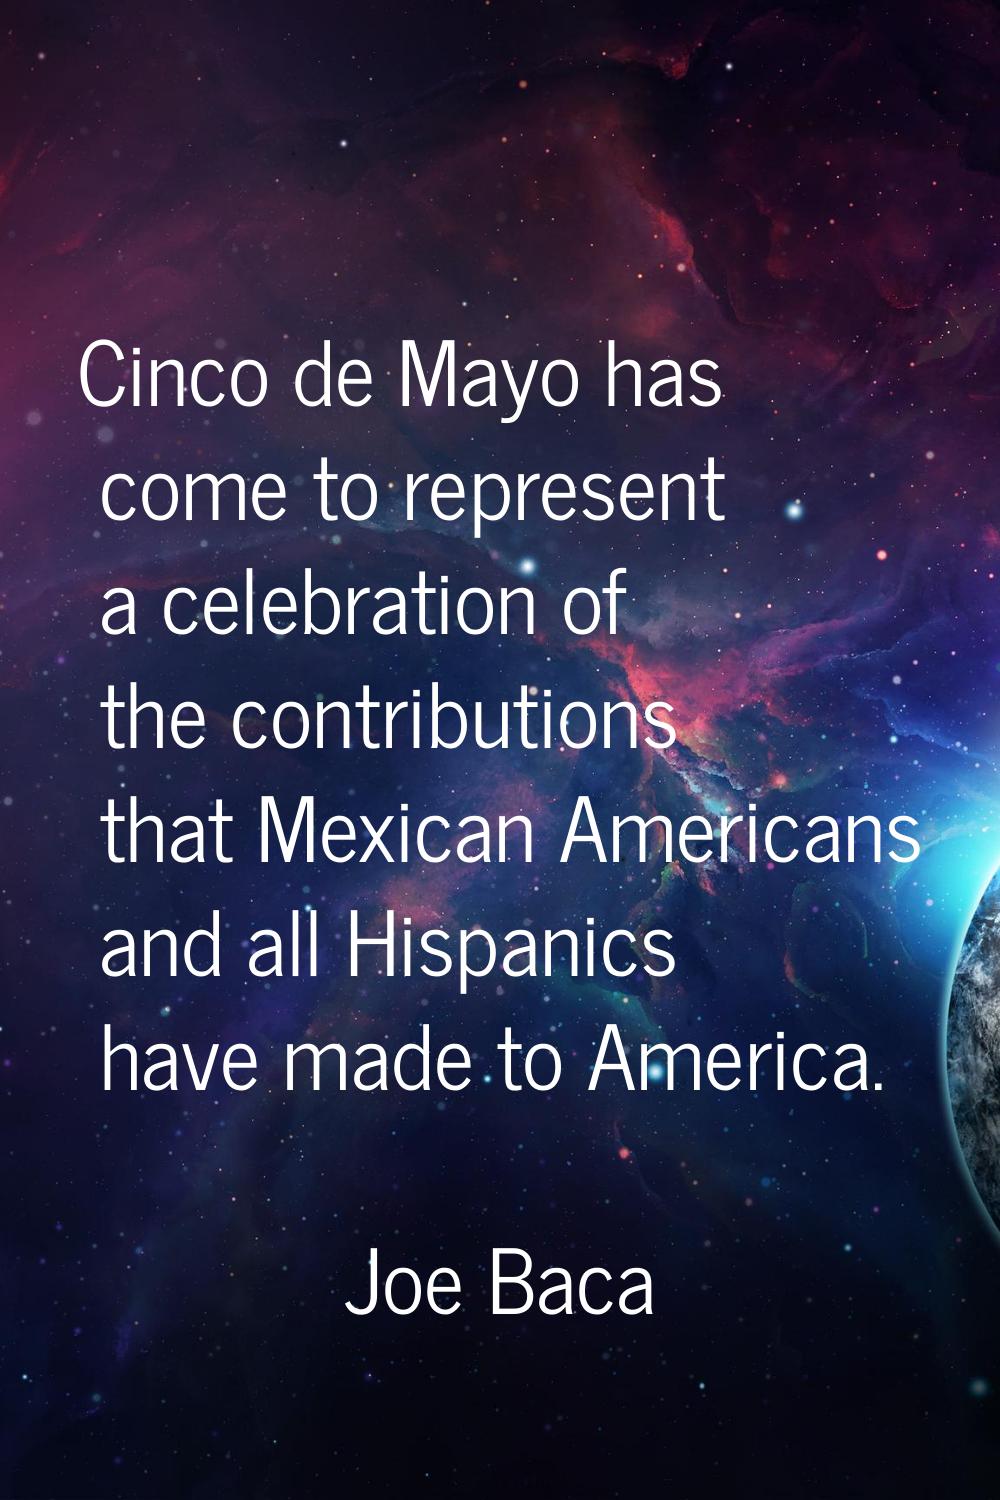 Cinco de Mayo has come to represent a celebration of the contributions that Mexican Americans and a